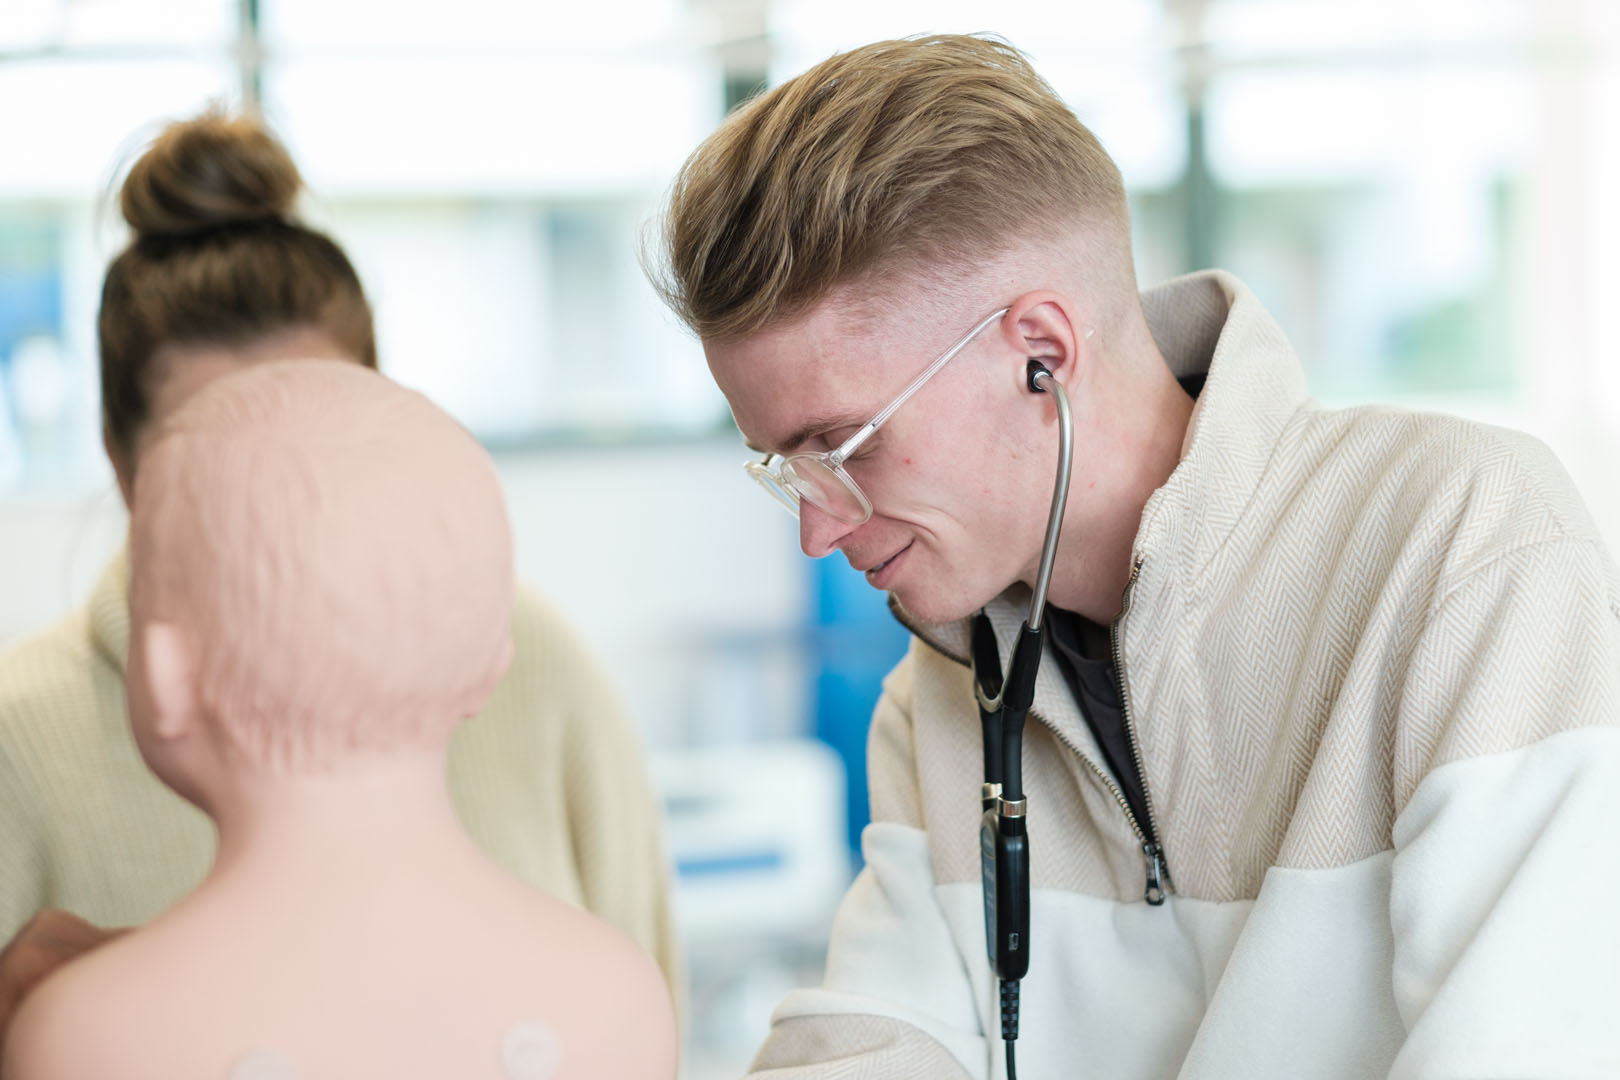 A student inspecting a medical dummy